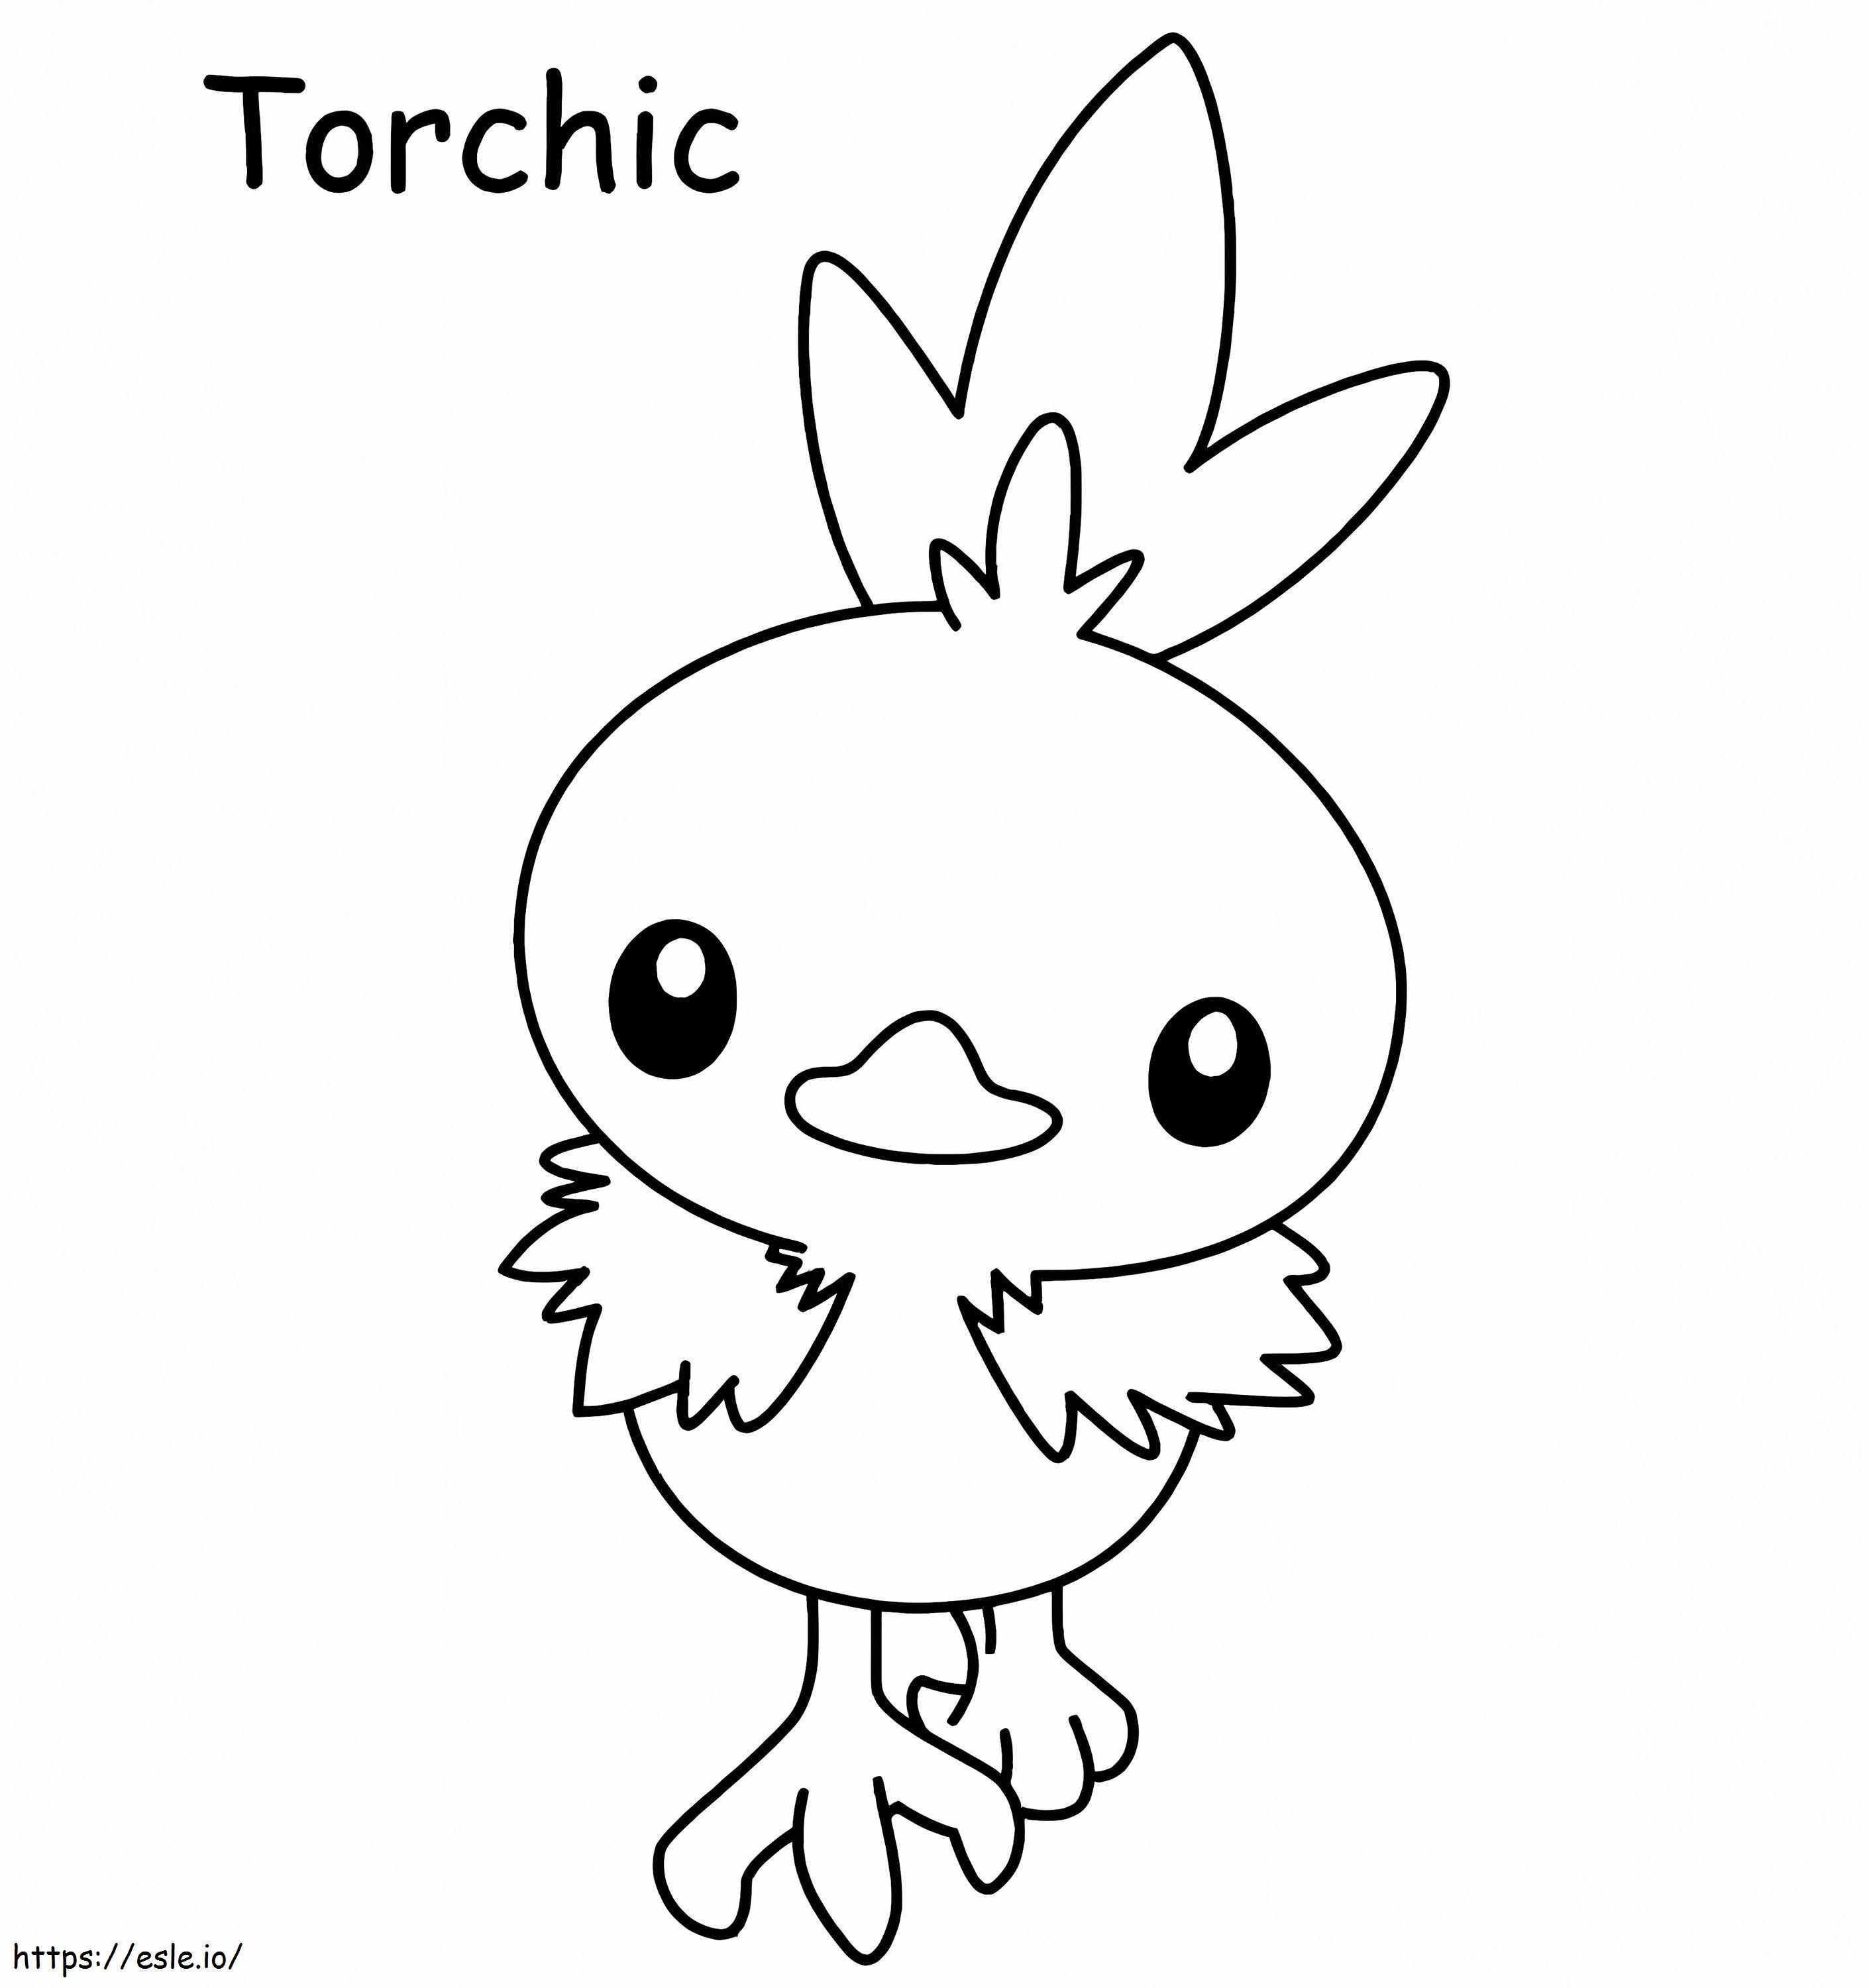 Torchic Image coloring page